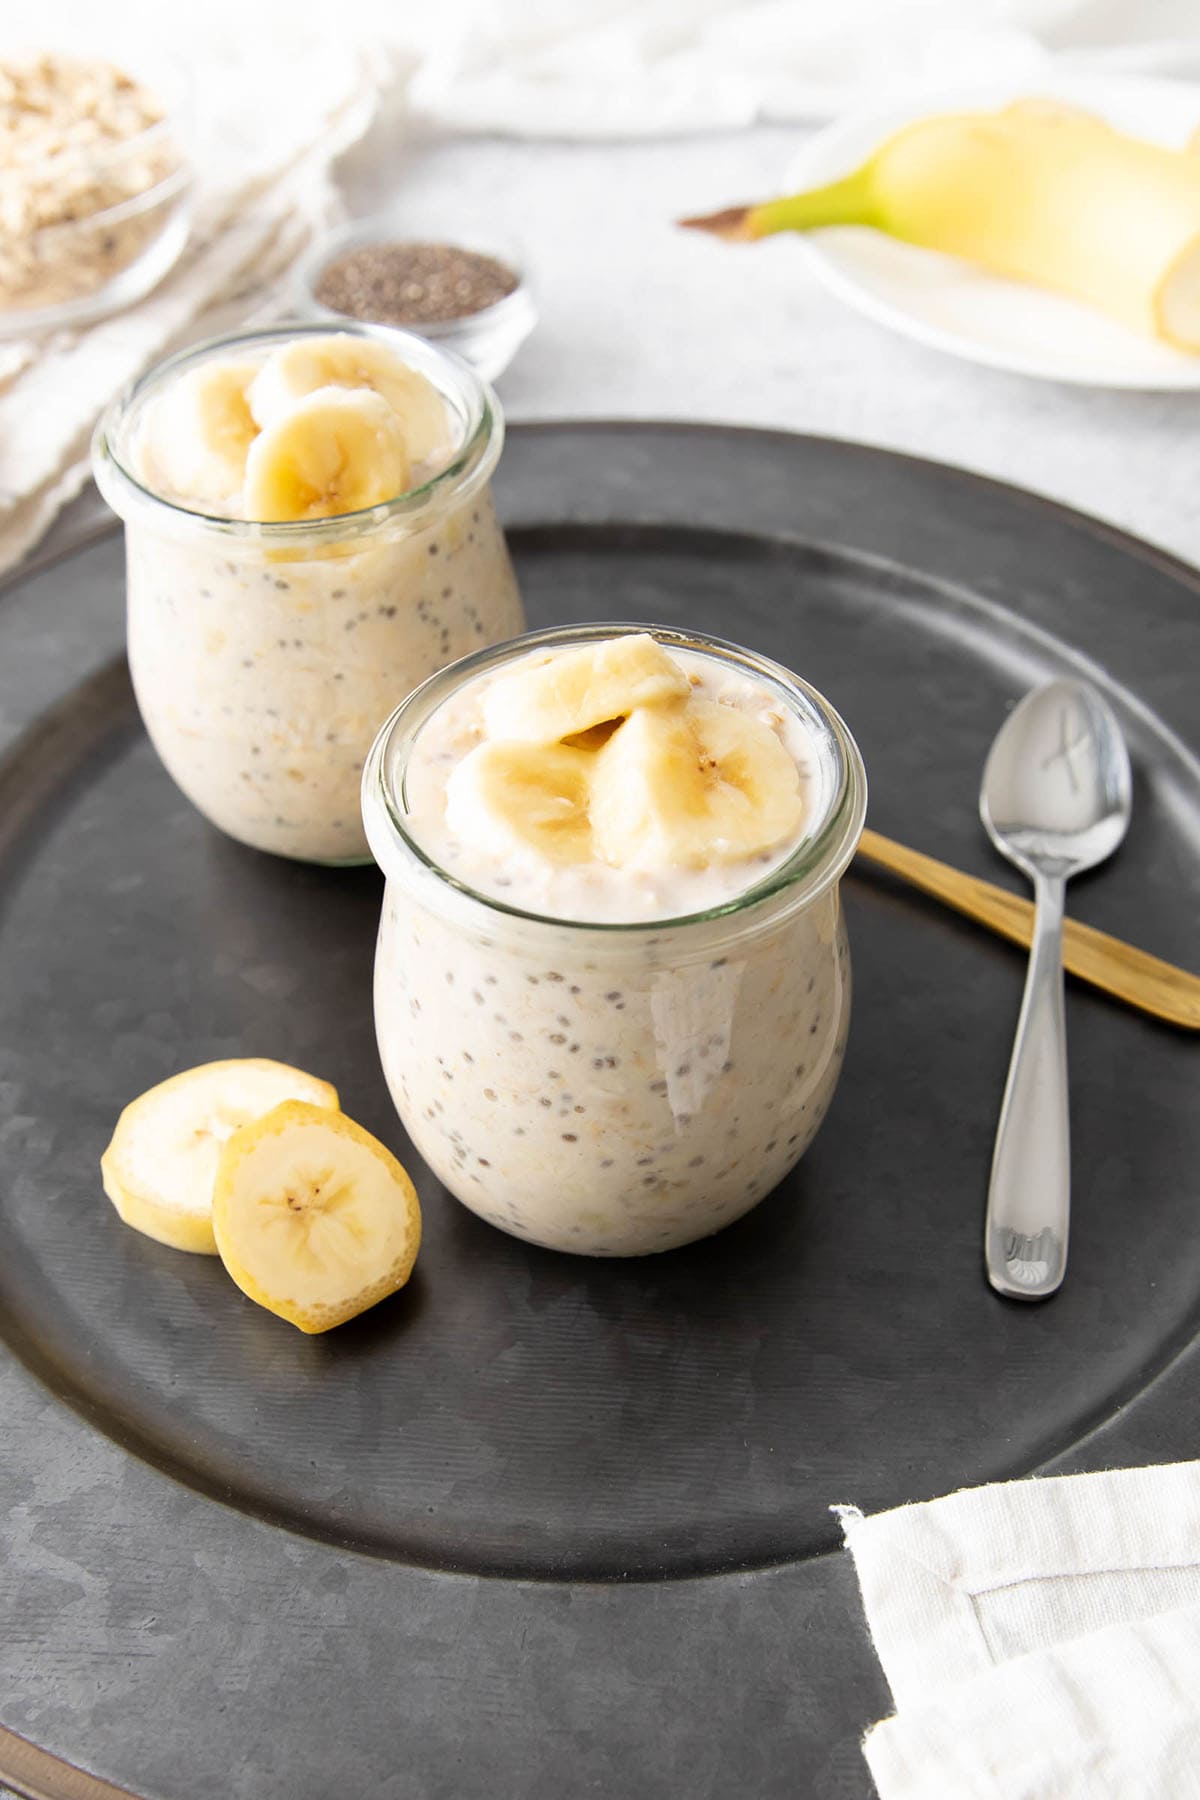 Banana overnight oats in two glass jars topped with sliced bananas